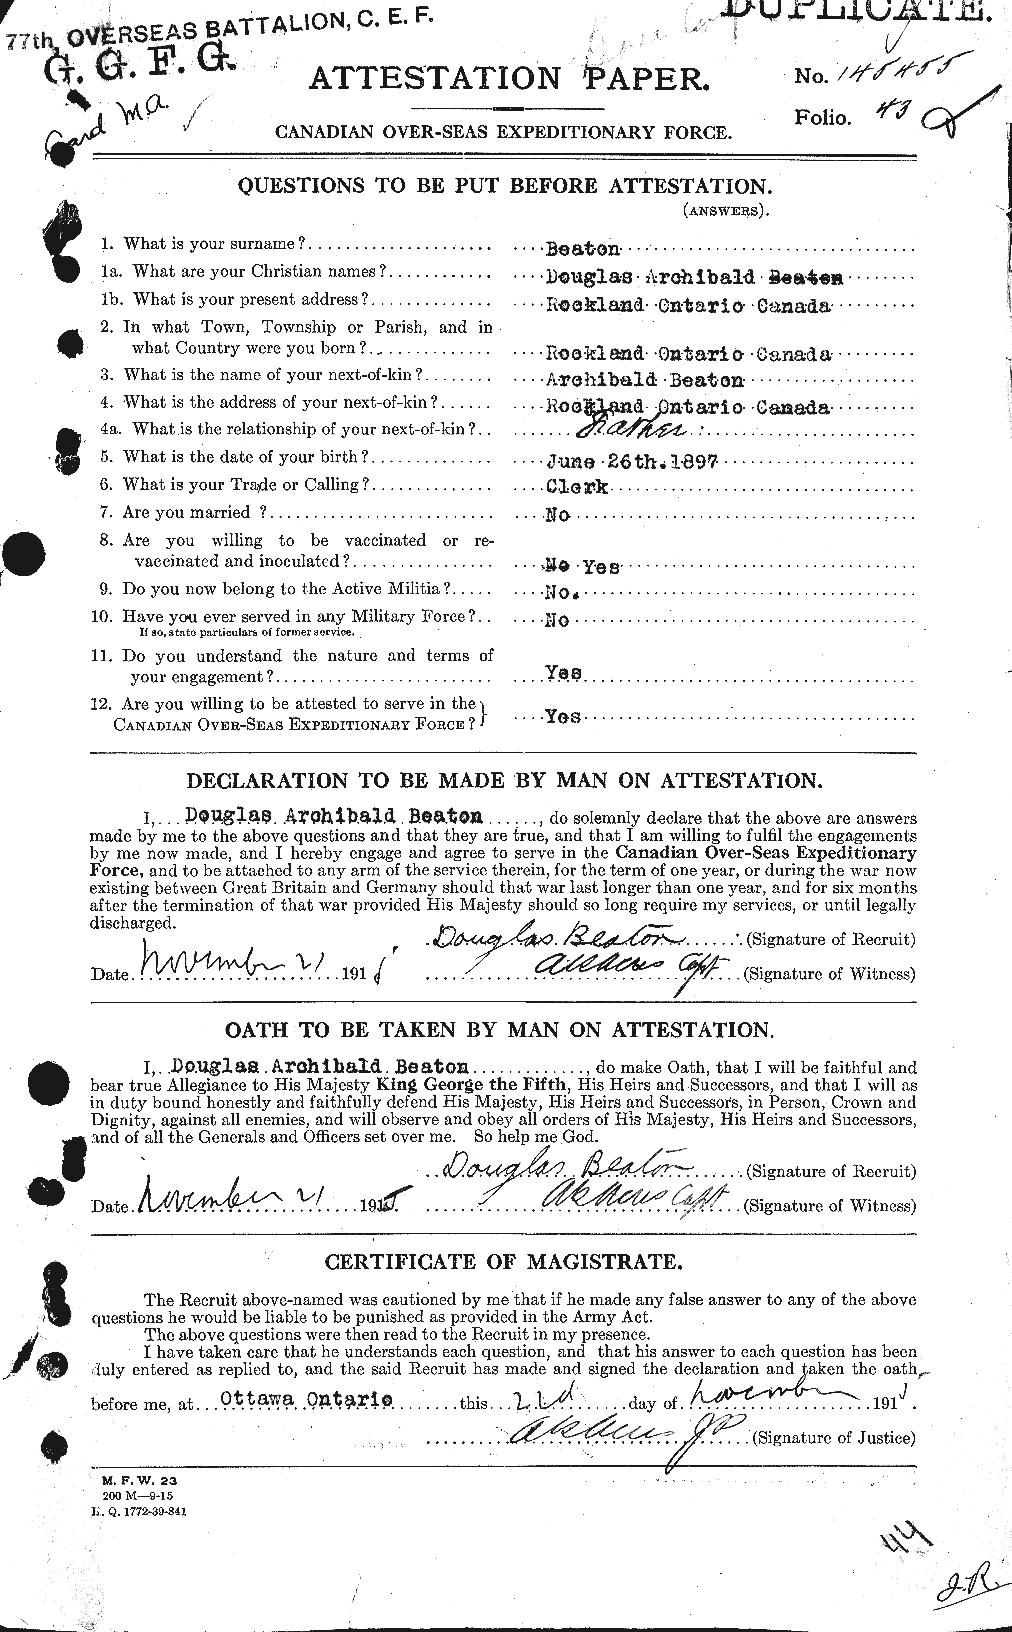 Personnel Records of the First World War - CEF 230491a